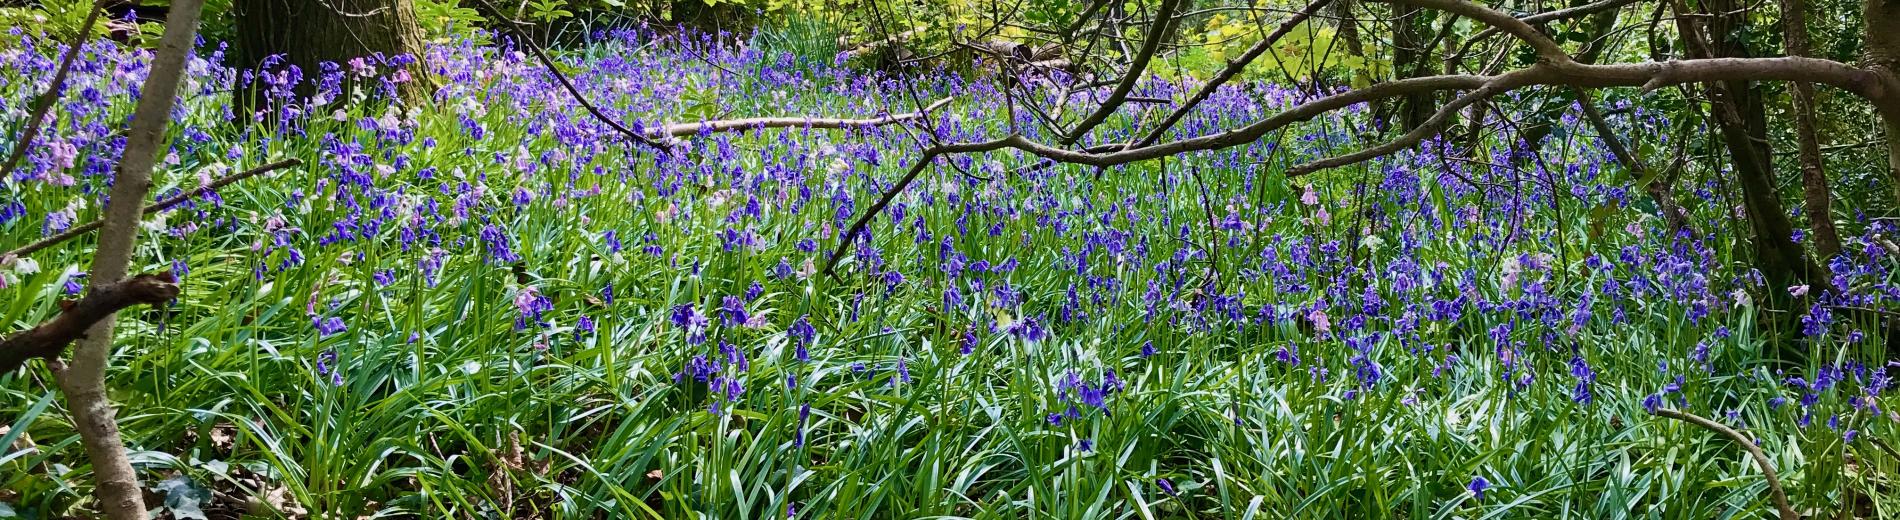 Bluebells in the wood at Spreacombe